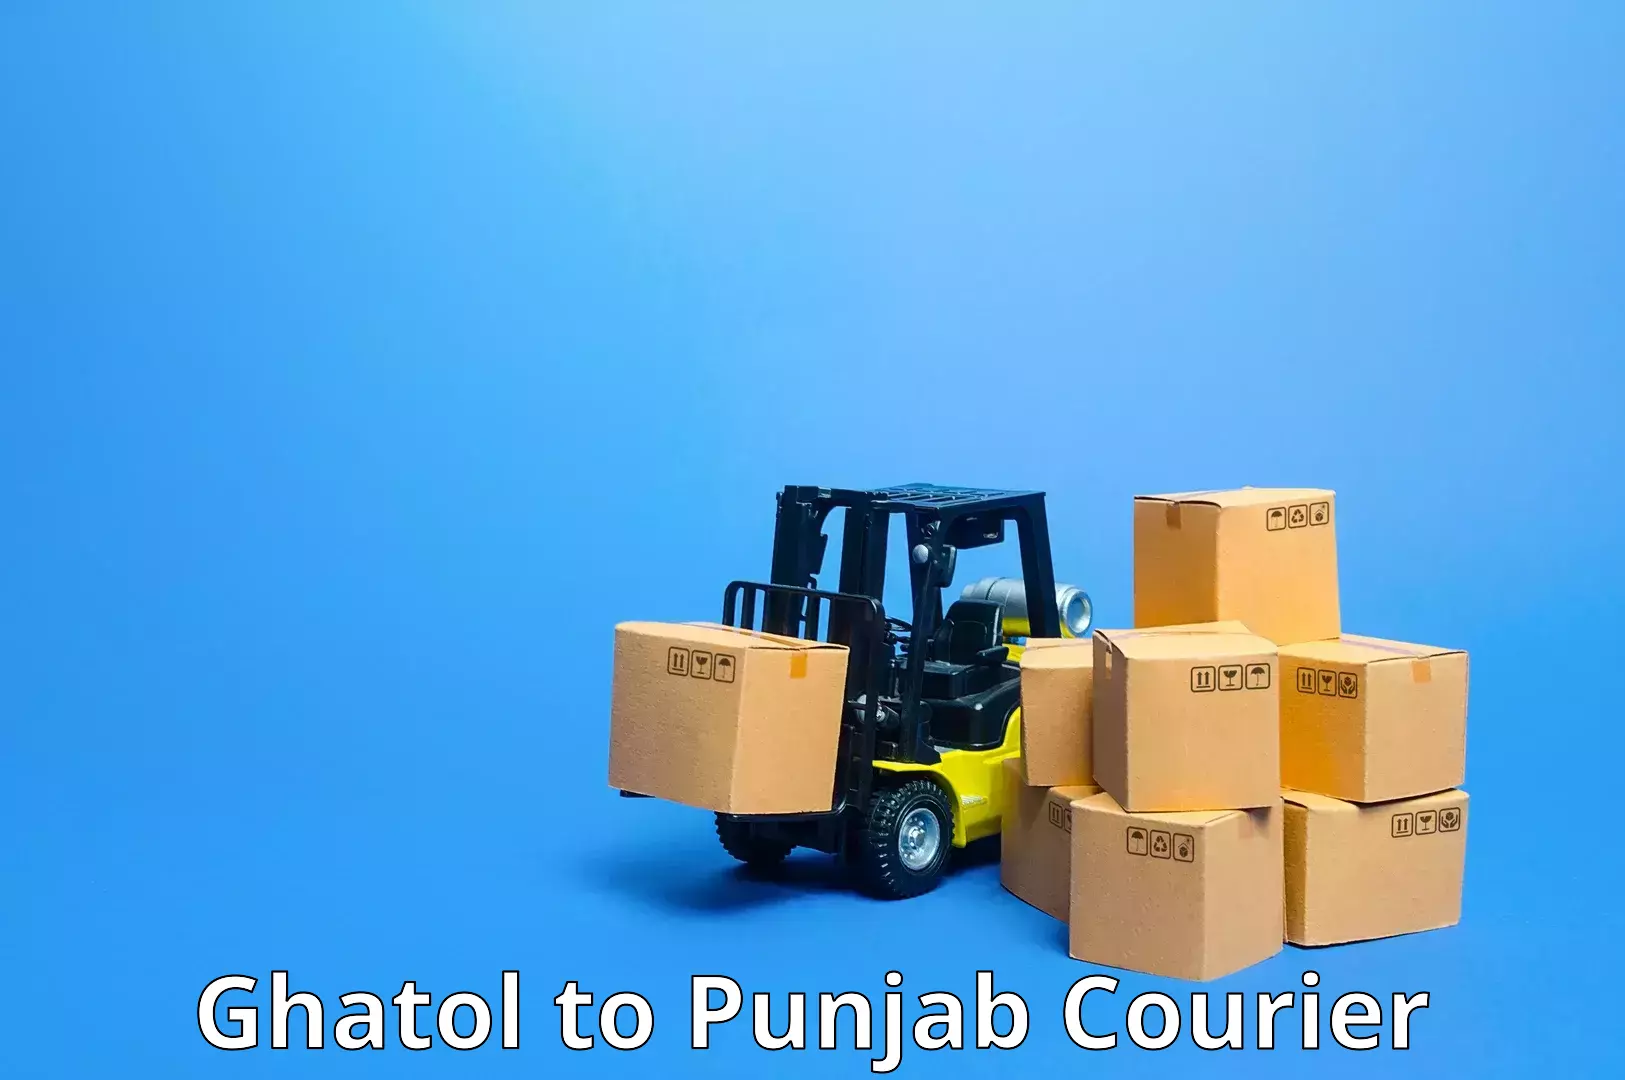 Cash on delivery service Ghatol to Tarsikka